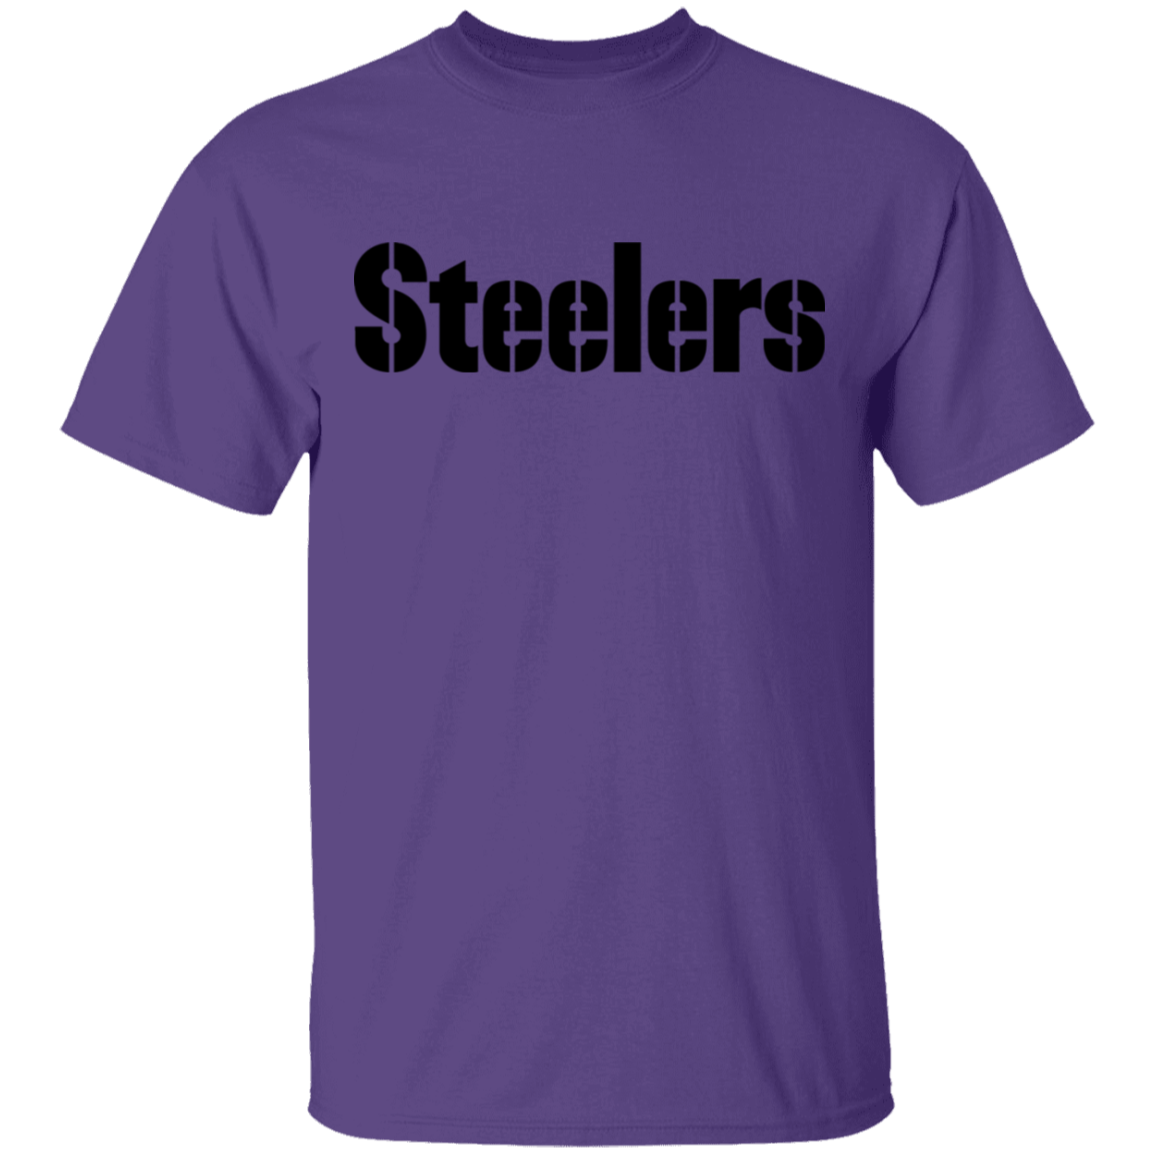 Pittsburgh Steelers T-Shirt - Happy Spring Tee free shipping